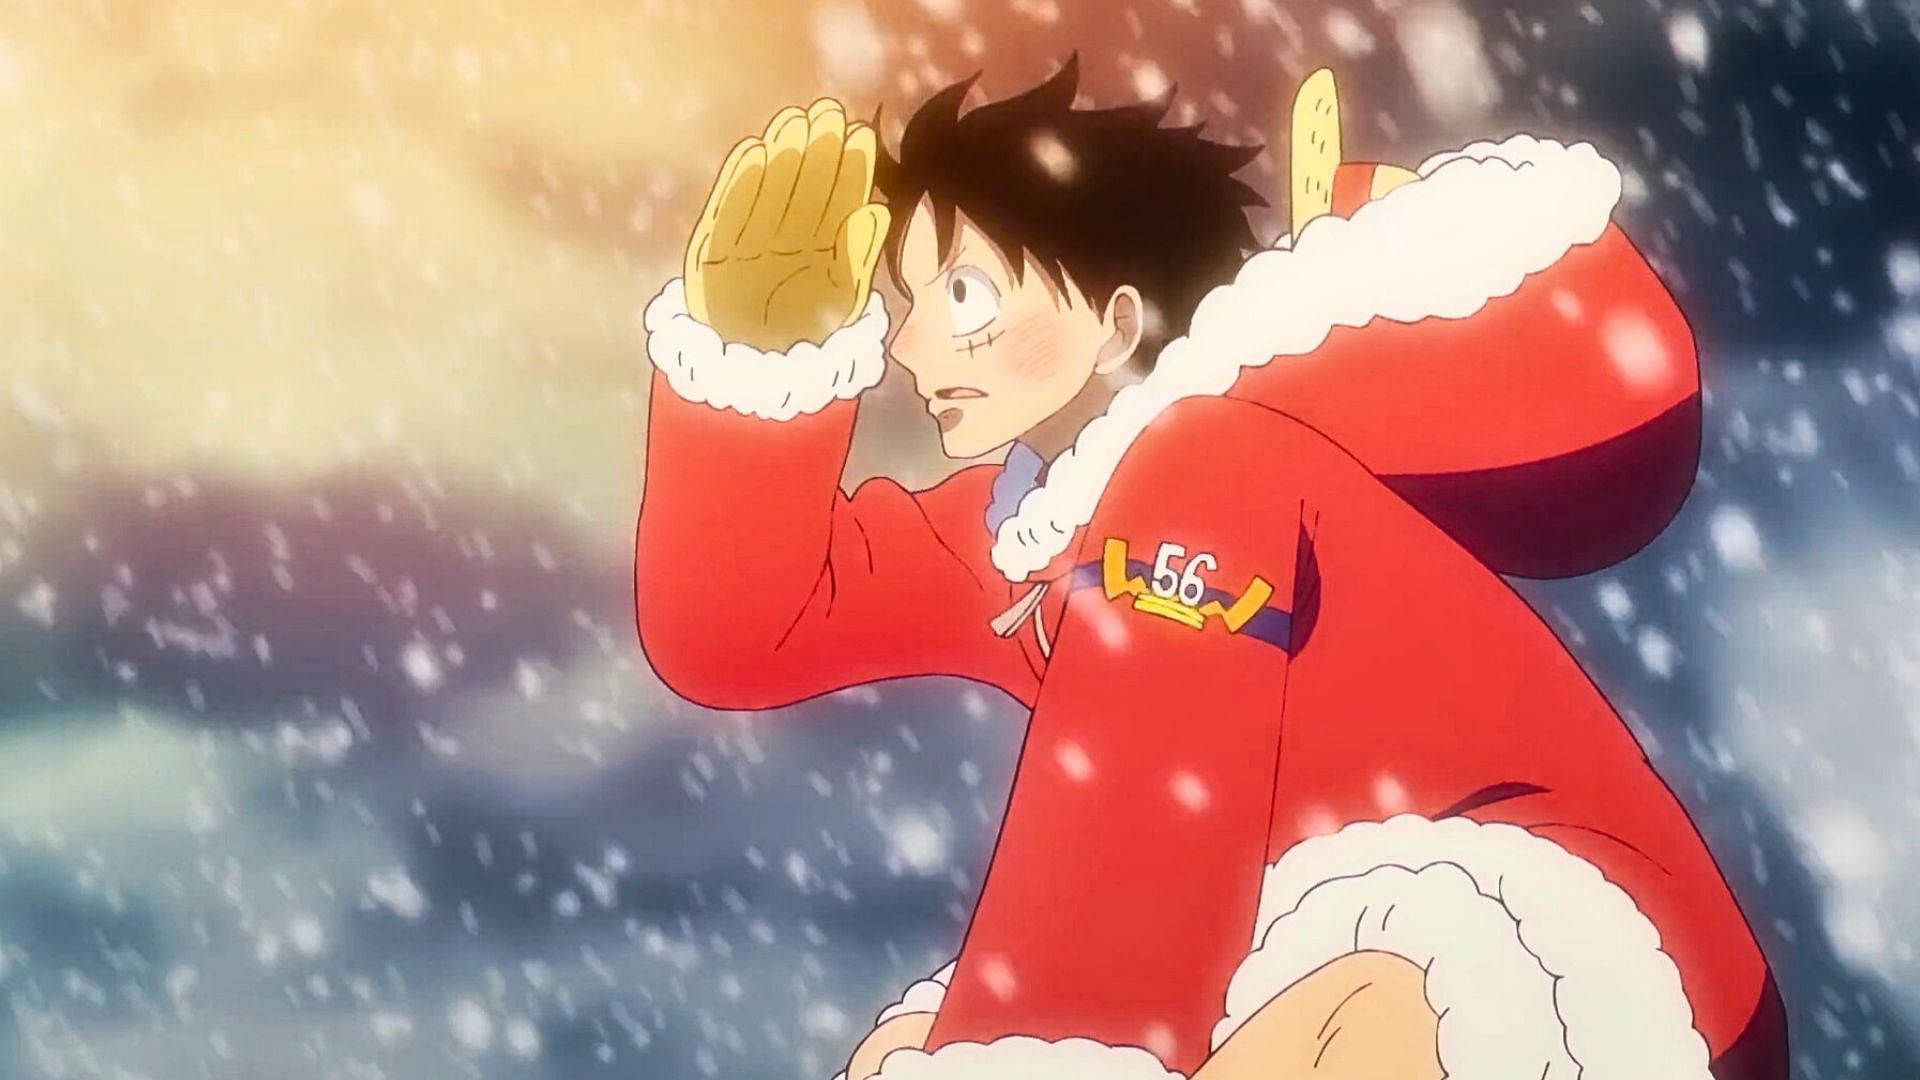 Luffy as seen in One Piece anime (Image via Toei Animation)